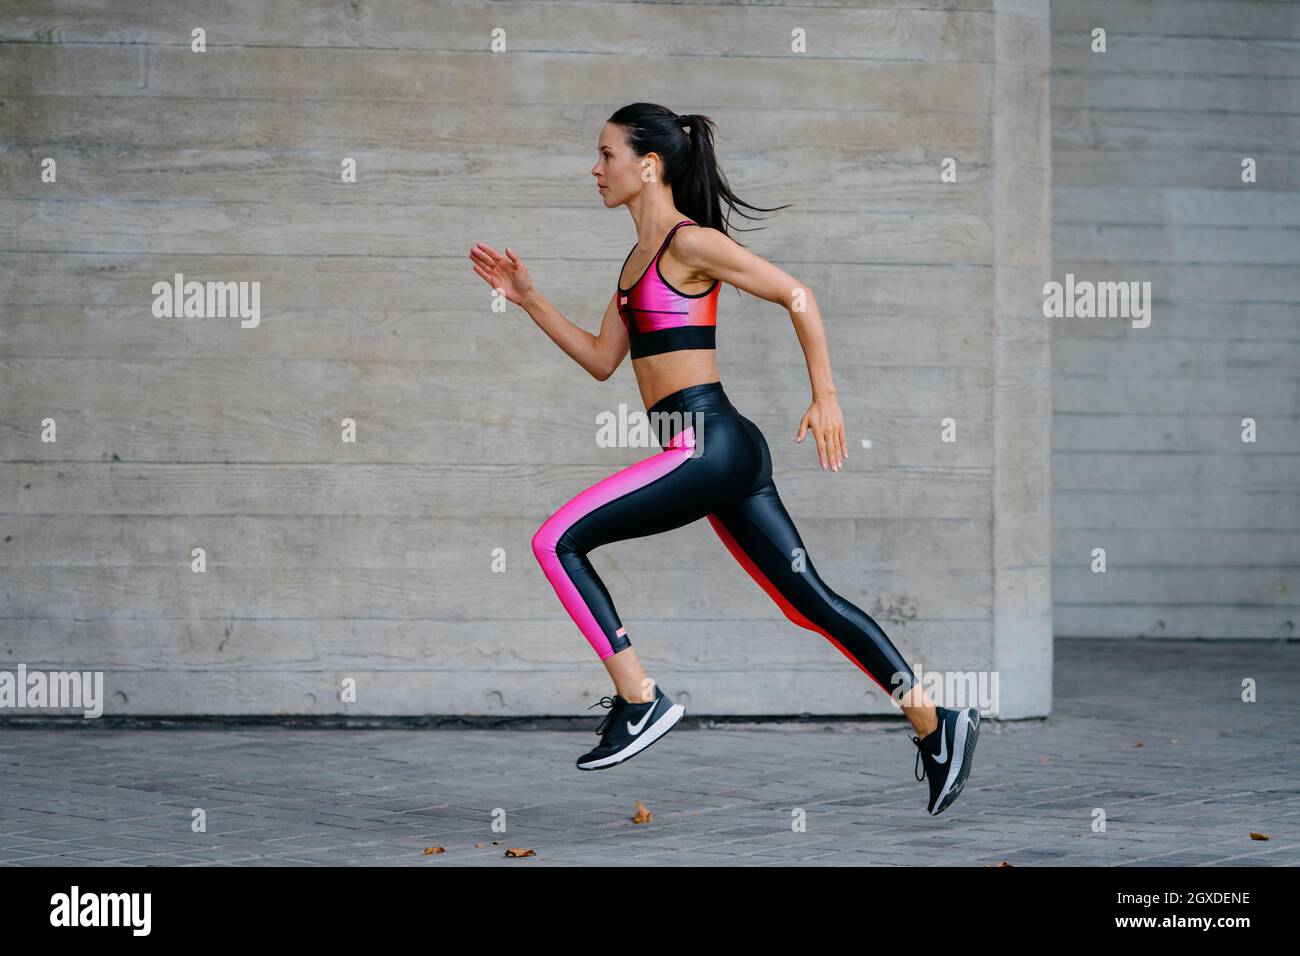 An athletic woman in a pink sports outfit running in an urban environment Stock Photo